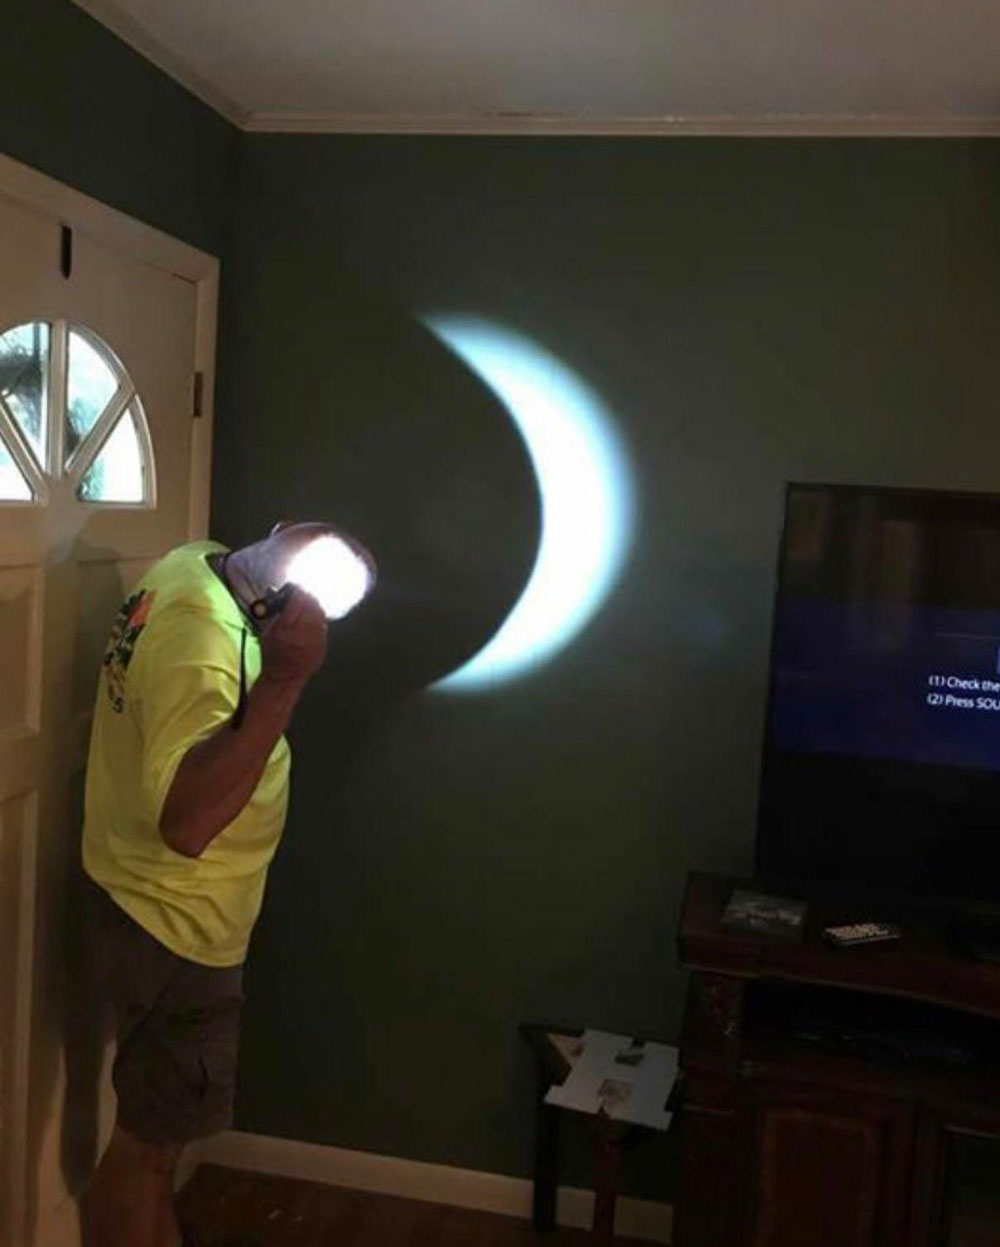 It stormed during the eclipse so my dad improvised